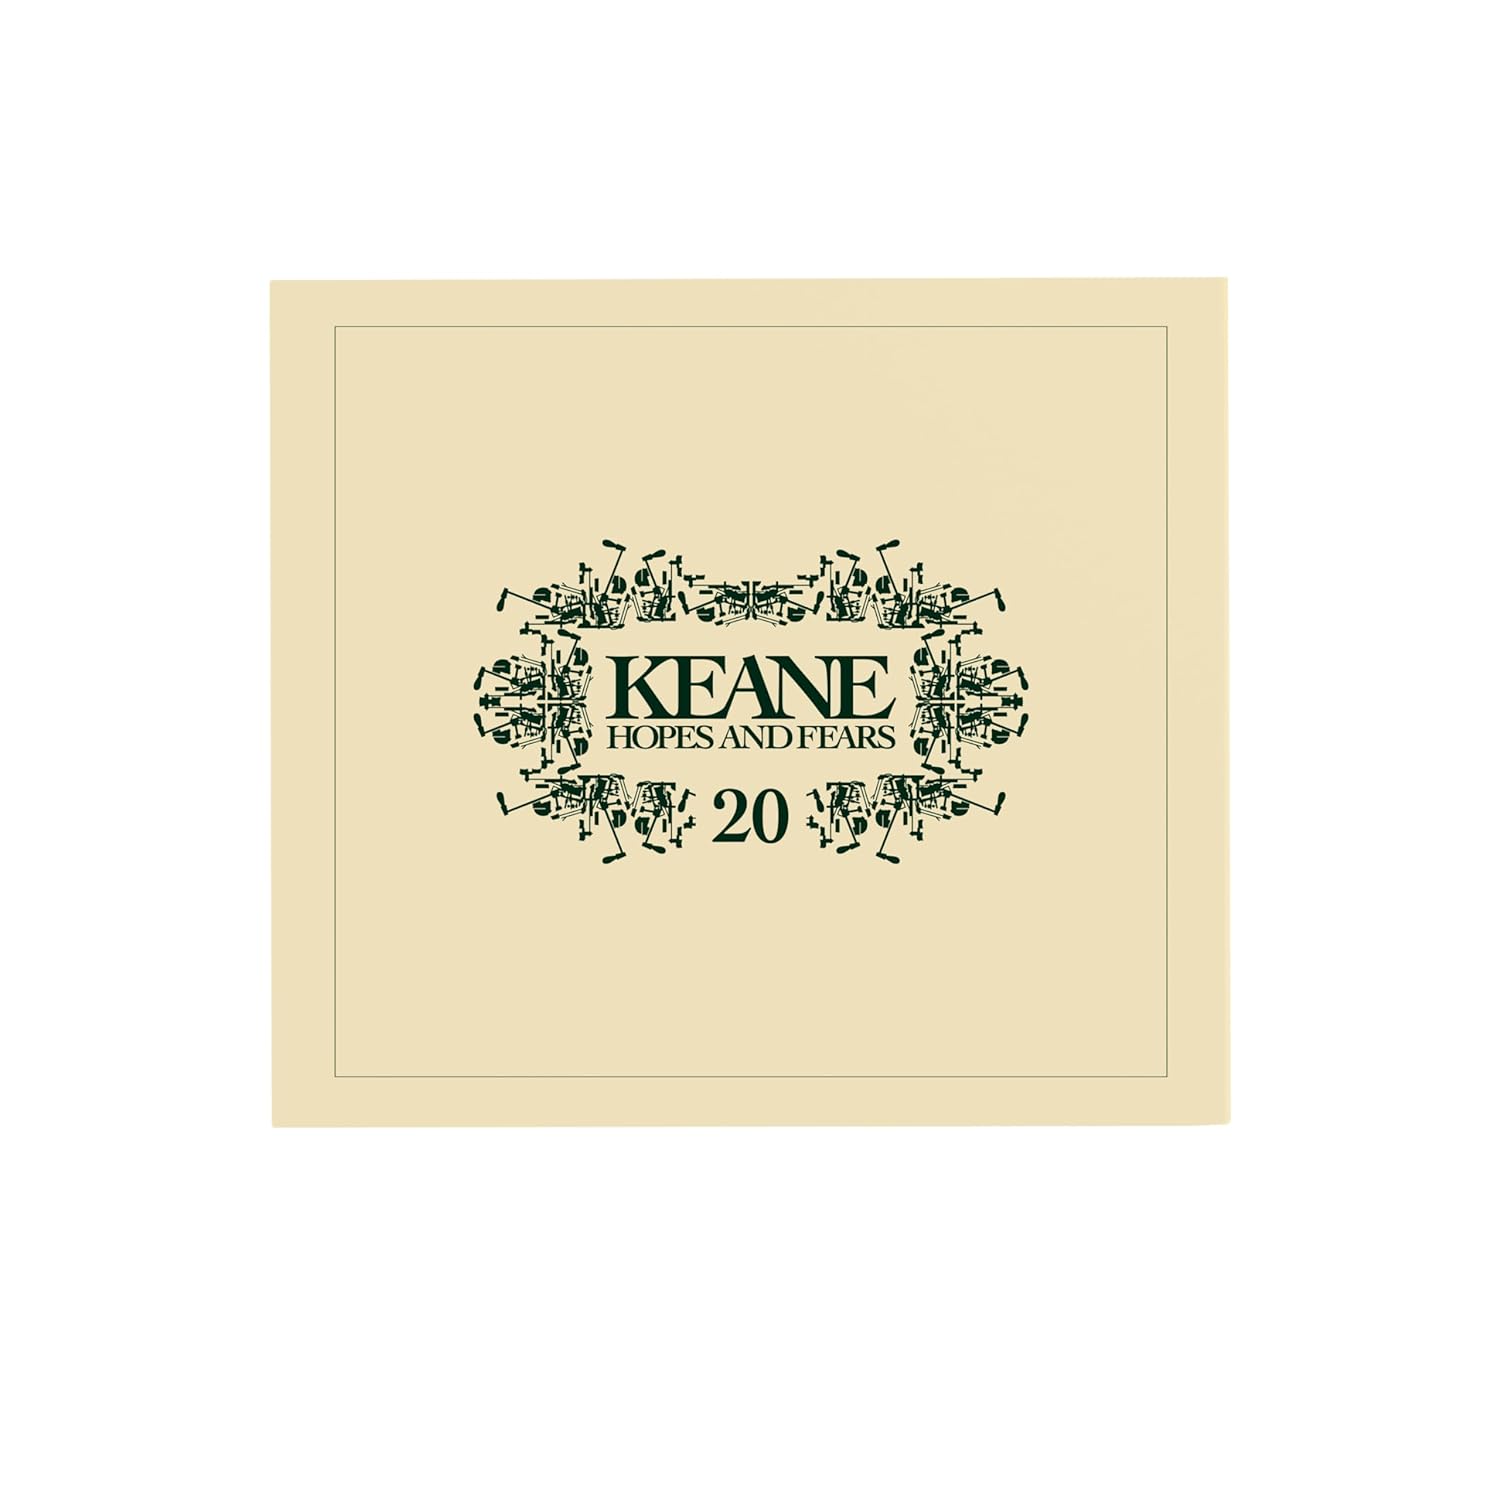 KEANE – HOPES AND FEARS 20th anniversary CD3